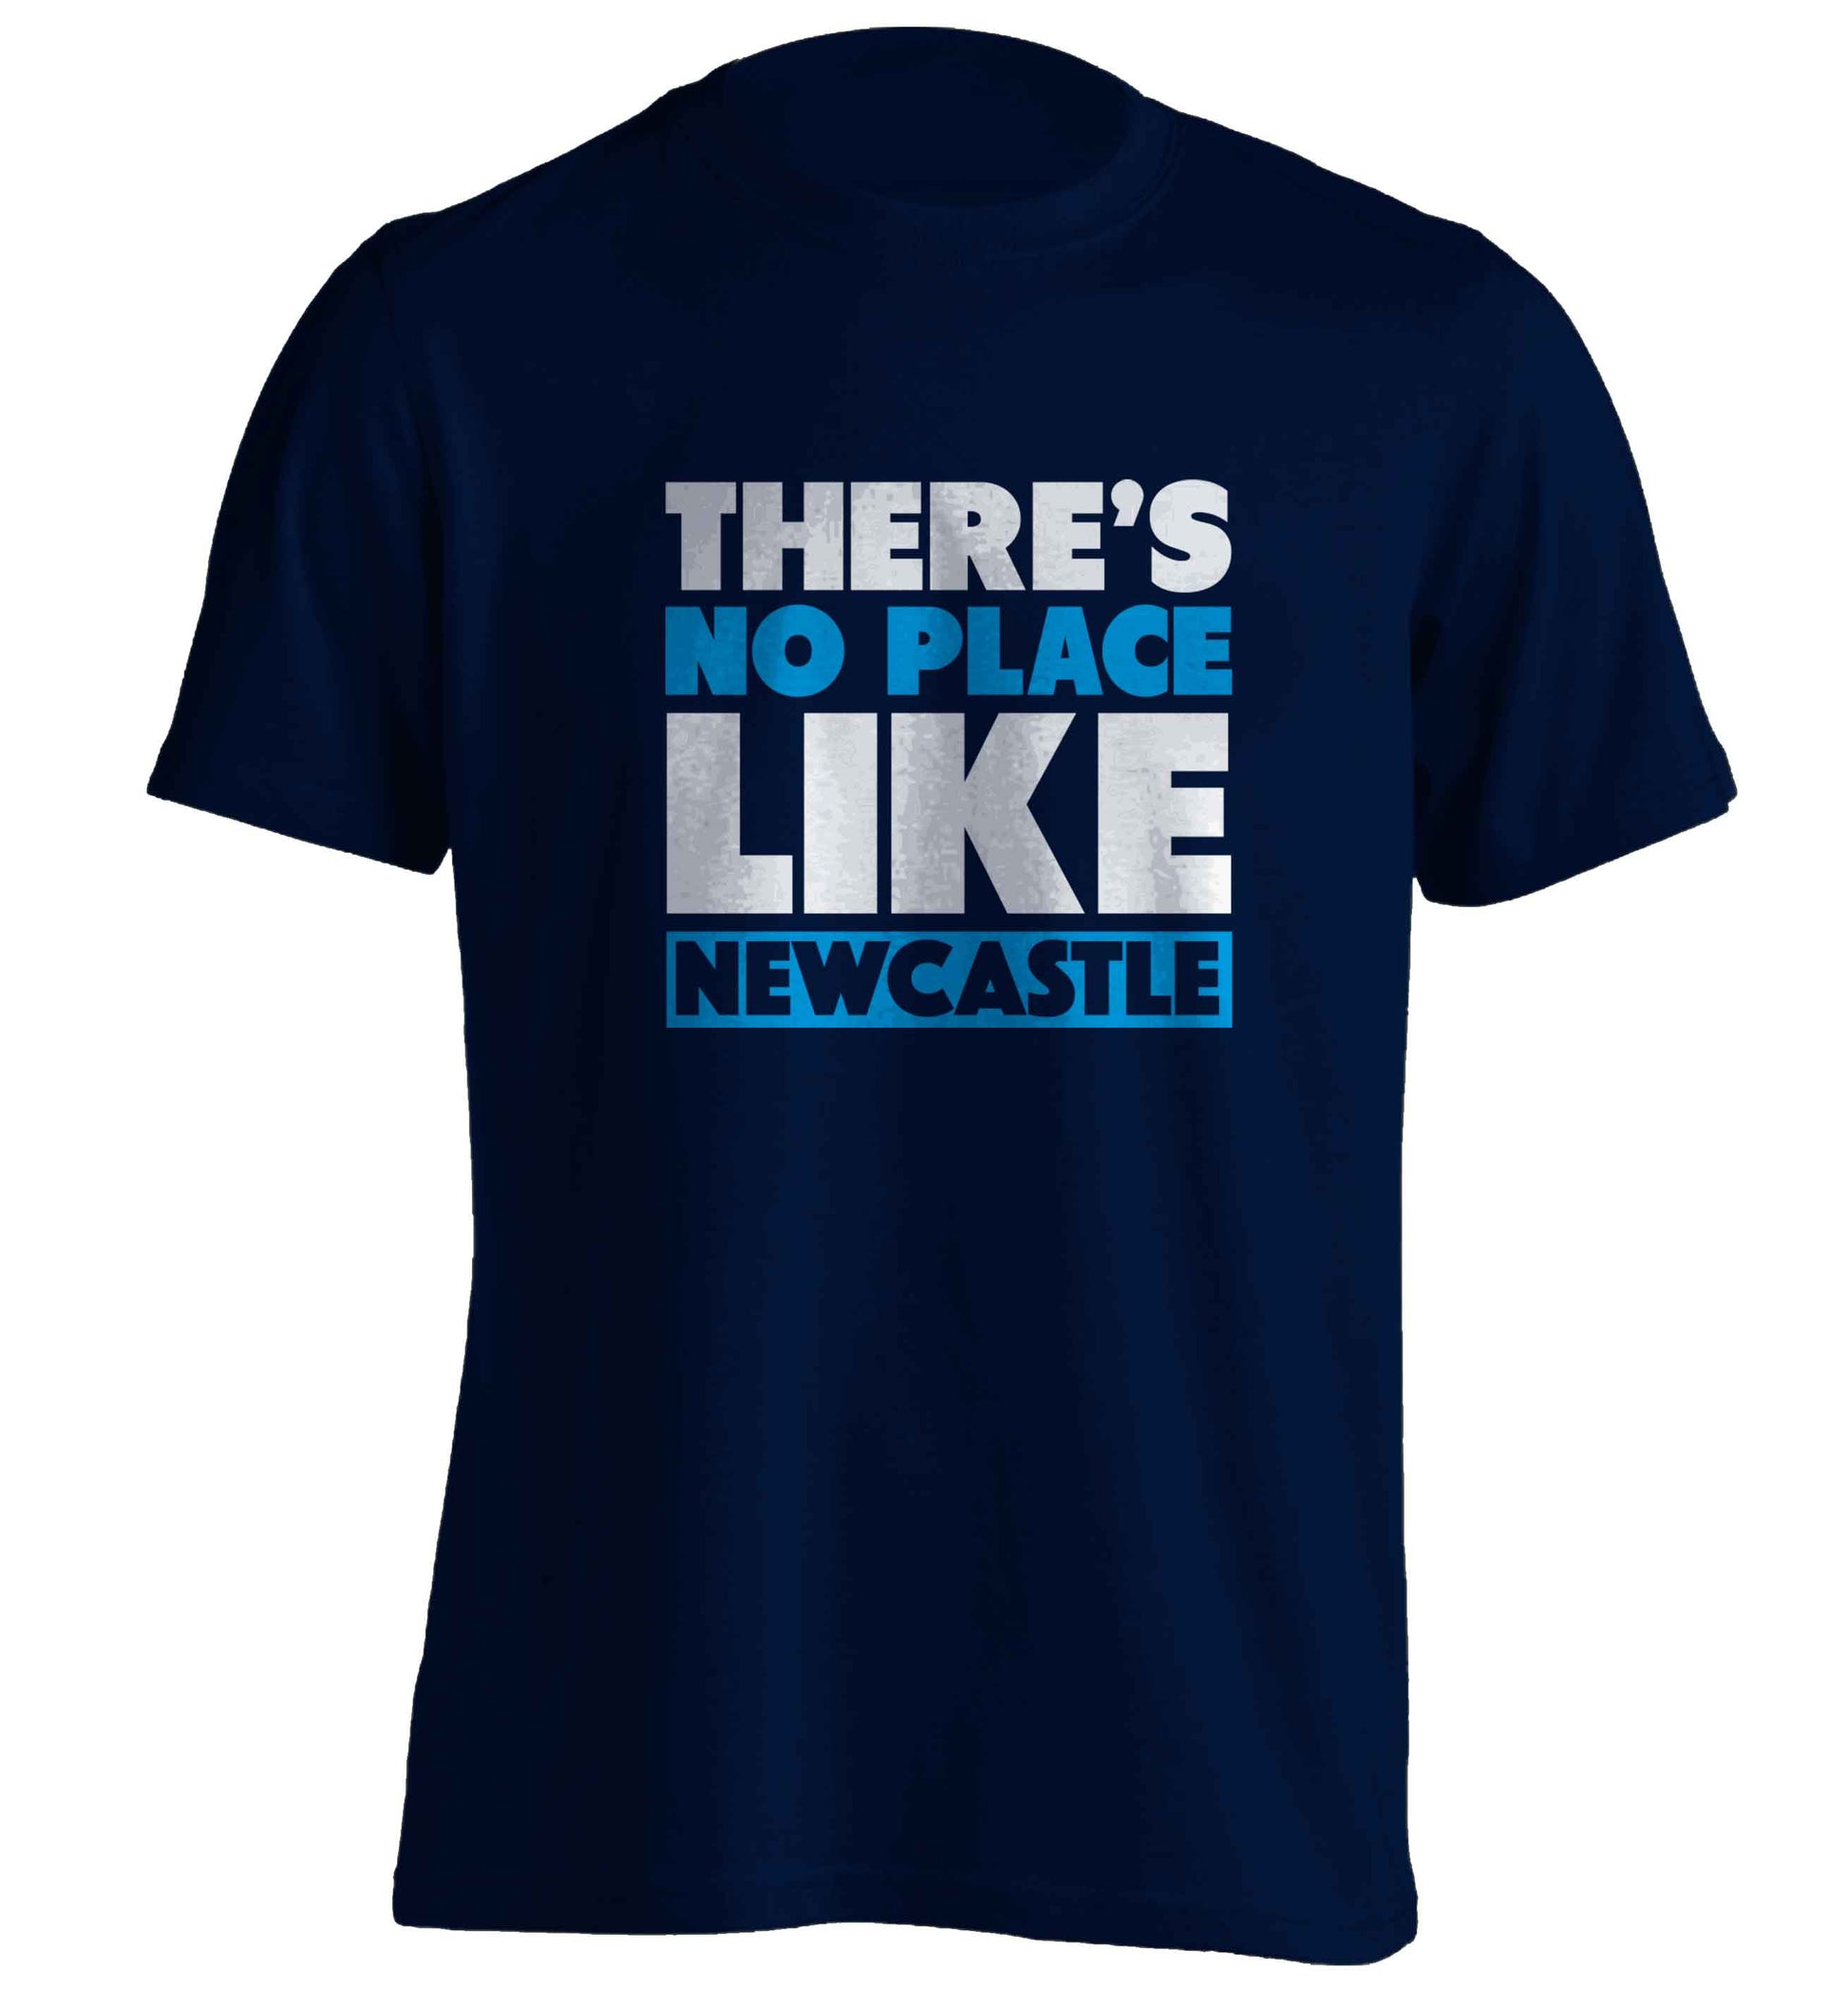 There's no place like Newcastle adults unisex navy Tshirt 2XL